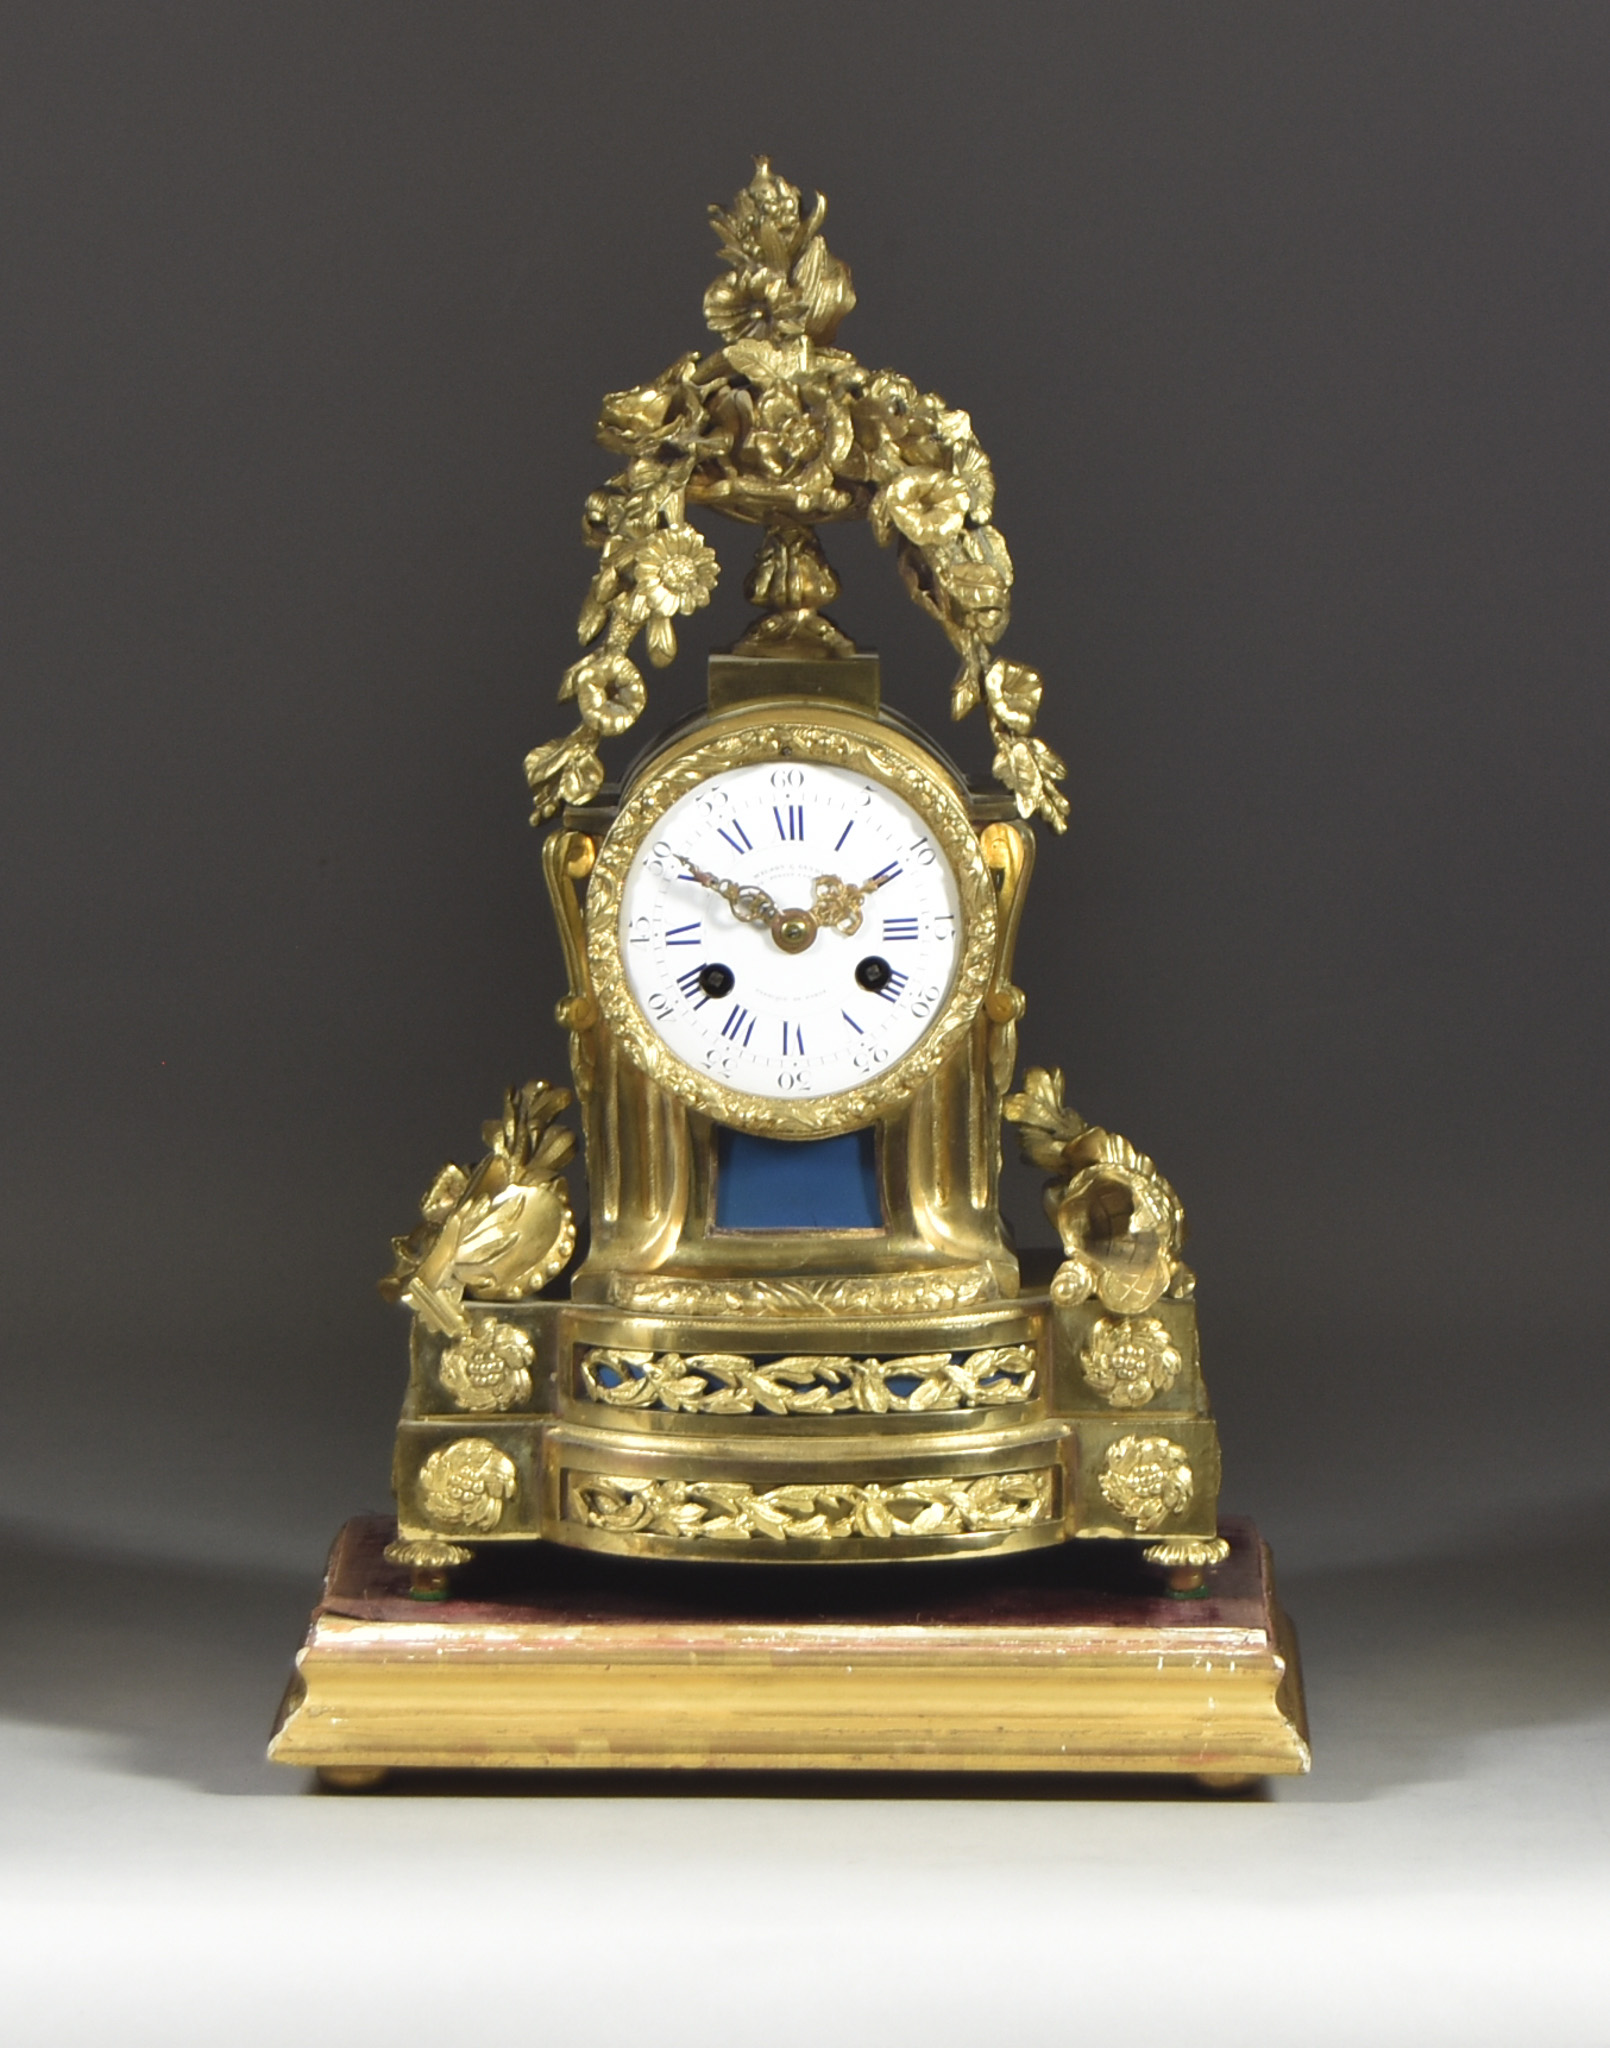 A 19th Century French Gilt Brass Mantel Clock by S.F & J.D. and retailed by Wilson and Gandar 392 - Image 2 of 2